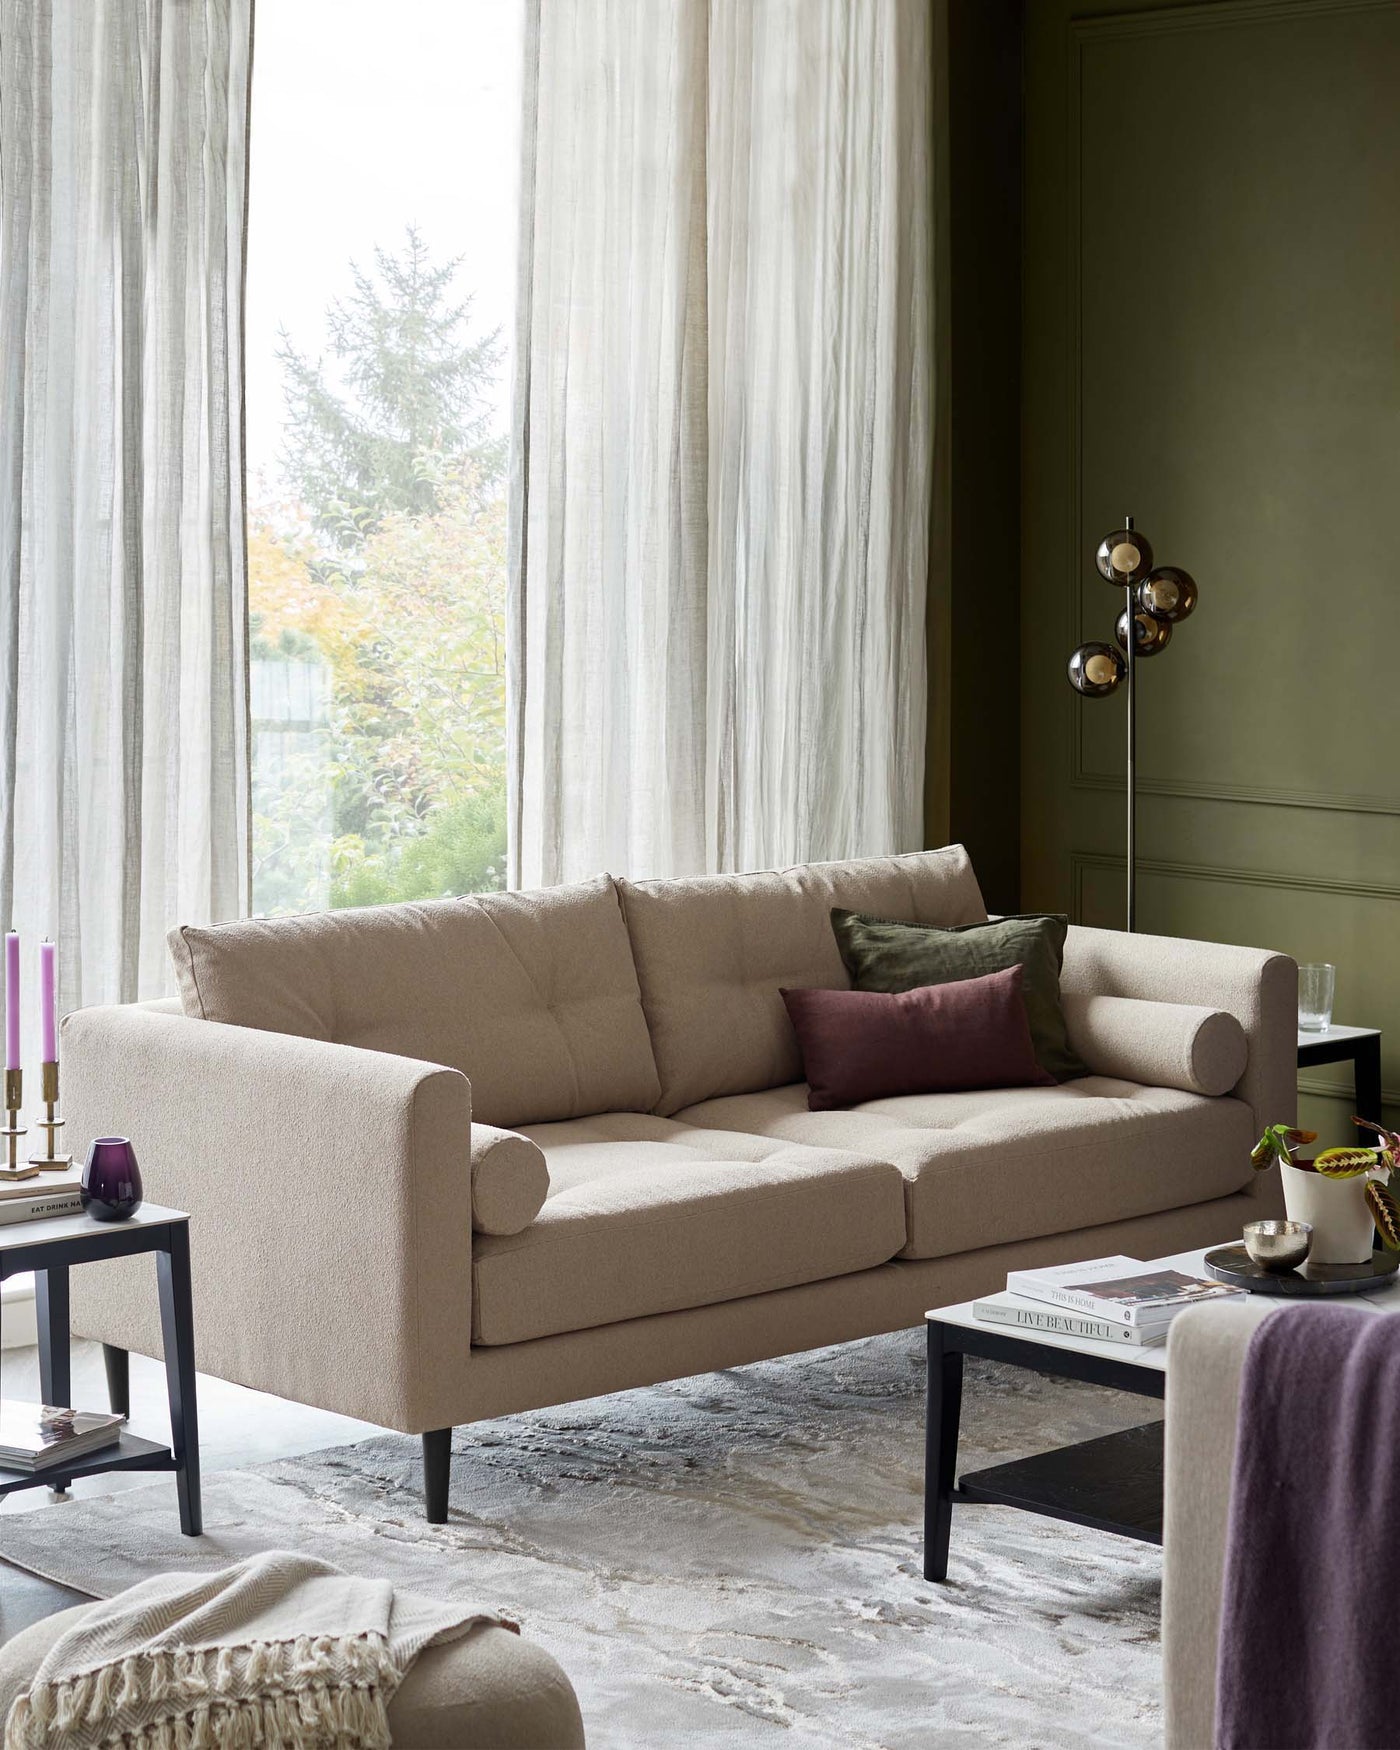 Elegant three-seater sofa upholstered in a neutral beige fabric with clean lines and rounded armrests on a minimalist black frame. Coordinated with a sleek black side table featuring a simple square top and slender legs. A textured light grey area rug underfoot adds a layer of warmth and comfort to the setting.